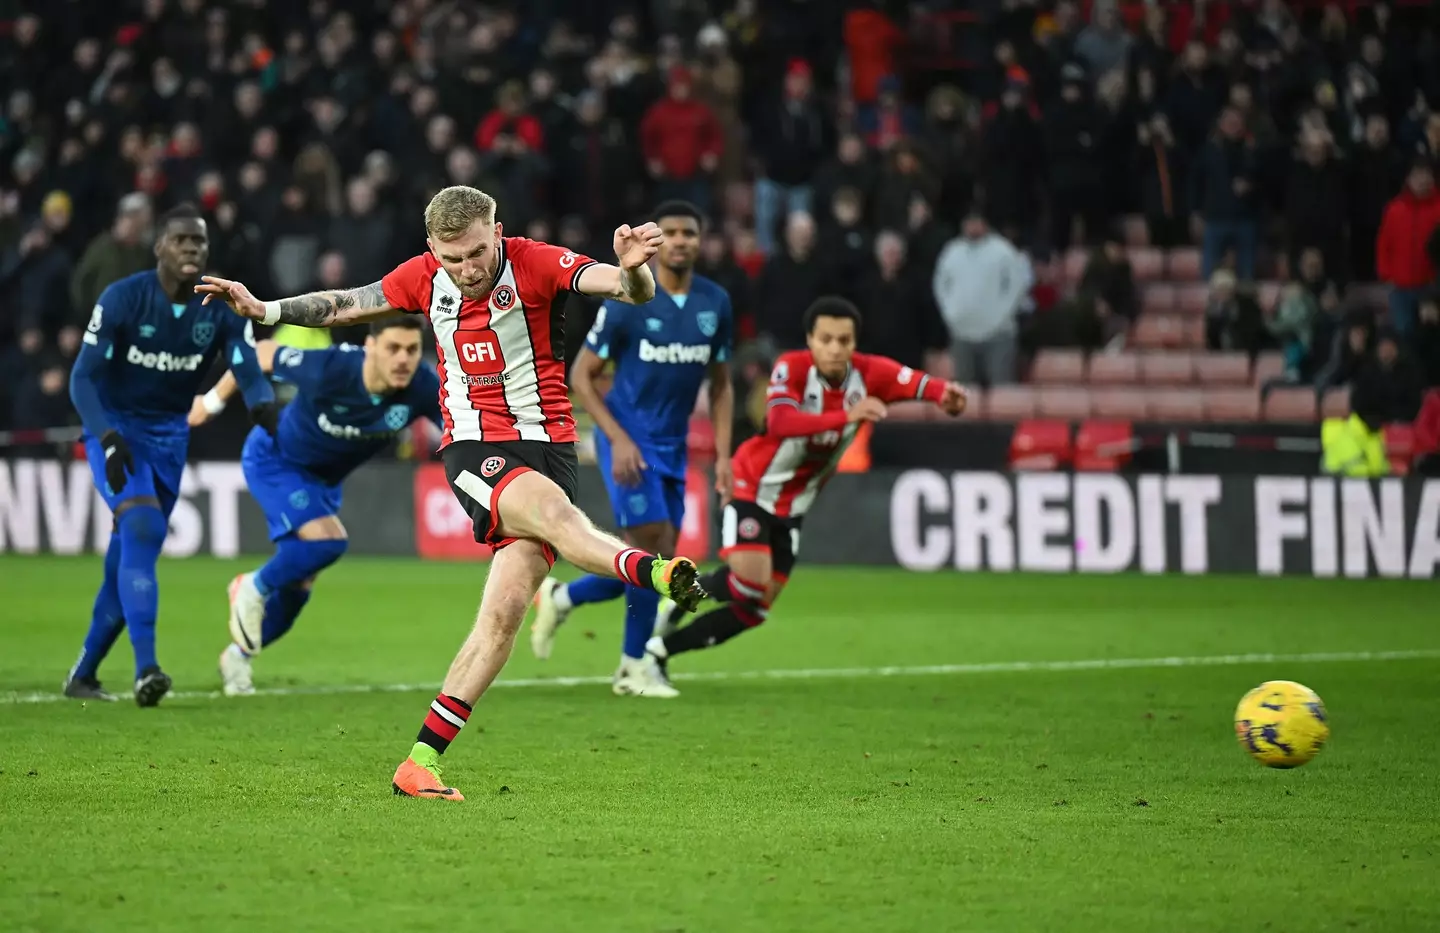 McBurnie broke a Premier League record with his penalty.